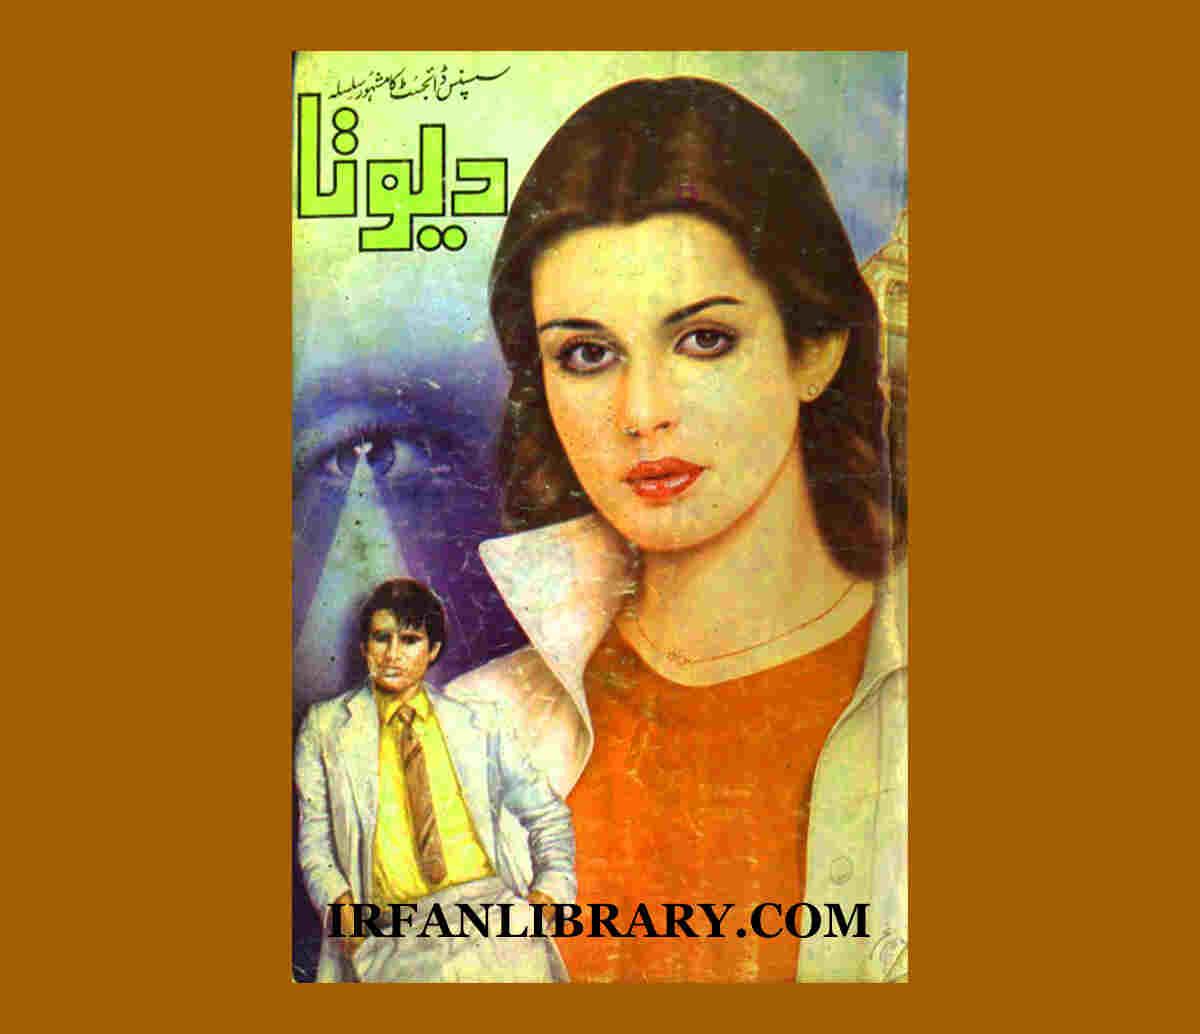 Devta Novel by Mohiuddin Nawab Complete Pdf Introduction to the Book: Devta is the longest and most widely read novel in Urdu language and literature. The author of this unique Urdu novel is the famous Urdu novelist Mohiuddin Nawab. This novel story has been published in the form of episodes in Suspense Digest for many years. The first episode of this novel was published in Suspense Digest in the year 1977. For writing such a wonderful and longest novel, Muhyiddin Nawab in Urdu. The founder of language and literature is called a novelist.His short parts have been published in the Digest for many years. Now this beautiful novel has been published in the form of a book and has come to the market. So far its 56 volumes have been printed and published. Mohiuddin Nawab has written this book in very simple and easy language. Even a common and moderately educated person can read it easily. Summary of the Novel Devta: The main character of the Urdu novel Devata is a young man named Farhad Ali Taimur. Farhad Ali's character has been blessed with immortal fame. Farhad has the characteristic of reading other people's minds easily. Knowing about other people's mental abilities is not a difficult task for him. He reads people's minds and uses them to crush anti-social elements.Farhad Ali uses people's minds for secret operations against anti-national elements. Farhad is also targeting mafias who are harming the country. He is planning to defeat them and is determined to achieve his task. Many economic mafias of the country are disgusted with Farhad's activities and want to thwart him. Therefore, conspiracies are being made. Uedu Novel Devta Complete 56 Volumes by Mohiuddin Nawab: Powerful and politically influential politicians are supporting big mafias. Together they are trying to bring Farhad under pressure. He is fighting their conspiracies very bravely. He has dedicated his life to fight against evil mafias. He is for this holy cause. He is ready to make any kind of sacrifice. Different mafias have plotted many times to kill him but they could not kill him.Did Farhad Ali Taimur succeed in crushing all the mafias active against him or not? Were the members of the political and economic mafia successful in their ambitions or not? What conspiracies did anti-social elements prepare against Farhad Ali Taimur? Read the novel to know the answer to all these questions. Author’s Introduction: Mohiuddin Nawab is a famous and best suspense and mysterious novelist and storyteller of Urdu literature. He has been writing spy novels for a long time. His novels have become very popular in recent times. His writing technique and storytelling skill have been liked by the public. The stories of her novels consist of social and romantic stories. You will also like the following beautiful Urdu PDF books similar to this book: • Taloot Urdu Novel by M.A Rahat • Hathyar Kion Dale by Waseem Sheikh • Sang Trash Urdu Novel by Aqleem Aleem • Raja Gidh Urdu Novel by Bano Qudsia • Hasil Ghat Urdu Novel by Bano Qudsia You can free download this beautiful book Devta Urdu Novel by Mohiyuddin Nawab from our site Irfanlibrary.com. Click on the download link given at the end of the article. You can easily study it on your computer. Devta Novel Complete Pdf free download: For offline reading of this book on computer you need to install PDF reader software in your computer. After downloading the book to your smartphone, install All-in-One Reader in your phone to read it. For online reading of the book, click on the read online link given at the end of this article. After a few seconds the book will open, and you will be able to study it. You can also share this book with your friends on Facebook, LinkedIn, Whatsapp, and Reddit. Devta Novel Read Online: We will upload more books on our site in coming days. Our team is working in this regard. Be sure to let us know your feedback and favorites to ensure more books are available. We will upload the books of your choice on the site. Your suggestions will be awaited. Read Online Download Link Devta Novel by Mohiuddin Nawab Complete Pdf Introduction to the Book: Devta is the longest and most widely read novel in Urdu language and literature. The author of this unique Urdu novel is the famous Urdu novelist Mohiuddin Nawab. This novel story has been published in the form of episodes in Suspense Digest for many years. The first episode of this novel was published in Suspense Digest in the year 1977. For writing such a wonderful and longest novel, Muhyiddin Nawab in Urdu. The founder of language and literature is called a novelist.His short parts have been published in the Digest for many years. Now this beautiful novel has been published in the form of a book and has come to the market. So far its 56 volumes have been printed and published. Mohiuddin Nawab has written this book in very simple and easy language. Even a common and moderately educated person can read it easily. Summary of the Novel Devta: The main character of the Urdu novel Devata is a young man named Farhad Ali Taimur. Farhad Ali's character has been blessed with immortal fame. Farhad has the characteristic of reading other people's minds easily. Knowing about other people's mental abilities is not a difficult task for him. He reads people's minds and uses them to crush anti-social elements.Farhad Ali uses people's minds for secret operations against anti-national elements. Farhad is also targeting mafias who are harming the country. He is planning to defeat them and is determined to achieve his task. Many economic mafias of the country are disgusted with Farhad's activities and want to thwart him. Therefore, conspiracies are being made. Uedu Novel Devta Complete 56 Volumes by Mohiuddin Nawab: Powerful and politically influential politicians are supporting big mafias. Together they are trying to bring Farhad under pressure. He is fighting their conspiracies very bravely. He has dedicated his life to fight against evil mafias. He is for this holy cause. He is ready to make any kind of sacrifice. Different mafias have plotted many times to kill him but they could not kill him.Did Farhad Ali Taimur succeed in crushing all the mafias active against him or not? Were the members of the political and economic mafia successful in their ambitions or not? What conspiracies did anti-social elements prepare against Farhad Ali Taimur? Read the novel to know the answer to all these questions. Author’s Introduction: Mohiuddin Nawab is a famous and best suspense and mysterious novelist and storyteller of Urdu literature. He has been writing spy novels for a long time. His novels have become very popular in recent times. His writing technique and storytelling skill have been liked by the public. The stories of her novels consist of social and romantic stories. You will also like the following beautiful Urdu PDF books similar to this book: • Taloot Urdu Novel by M.A Rahat • Hathyar Kion Dale by Waseem Sheikh • Sang Trash Urdu Novel by Aqleem Aleem • Raja Gidh Urdu Novel by Bano Qudsia • Hasil Ghat Urdu Novel by Bano Qudsia You can free download this beautiful book Devta Urdu Novel by Mohiyuddin Nawab from our site Irfanlibrary.com. Click on the download link given at the end of the article. You can easily study it on your computer. Devta Novel Complete Pdf free download: For offline reading of this book on computer you need to install PDF reader software in your computer. After downloading the book to your smartphone, install All-in-One Reader in your phone to read it. For online reading of the book, click on the read online link given at the end of this article. After a few seconds the book will open, and you will be able to study it. You can also share this book with your friends on Facebook, LinkedIn, Whatsapp, and Reddit. Devta Novel Read Online: We will upload more books on our site in coming days. Our team is working in this regard. Be sure to let us know your feedback and favorites to ensure more books are available. We will upload the books of your choice on the site. Your suggestions will be awaited. Read Online Download Link Devta Novel by Mohiuddin Nawab Complete Pdf